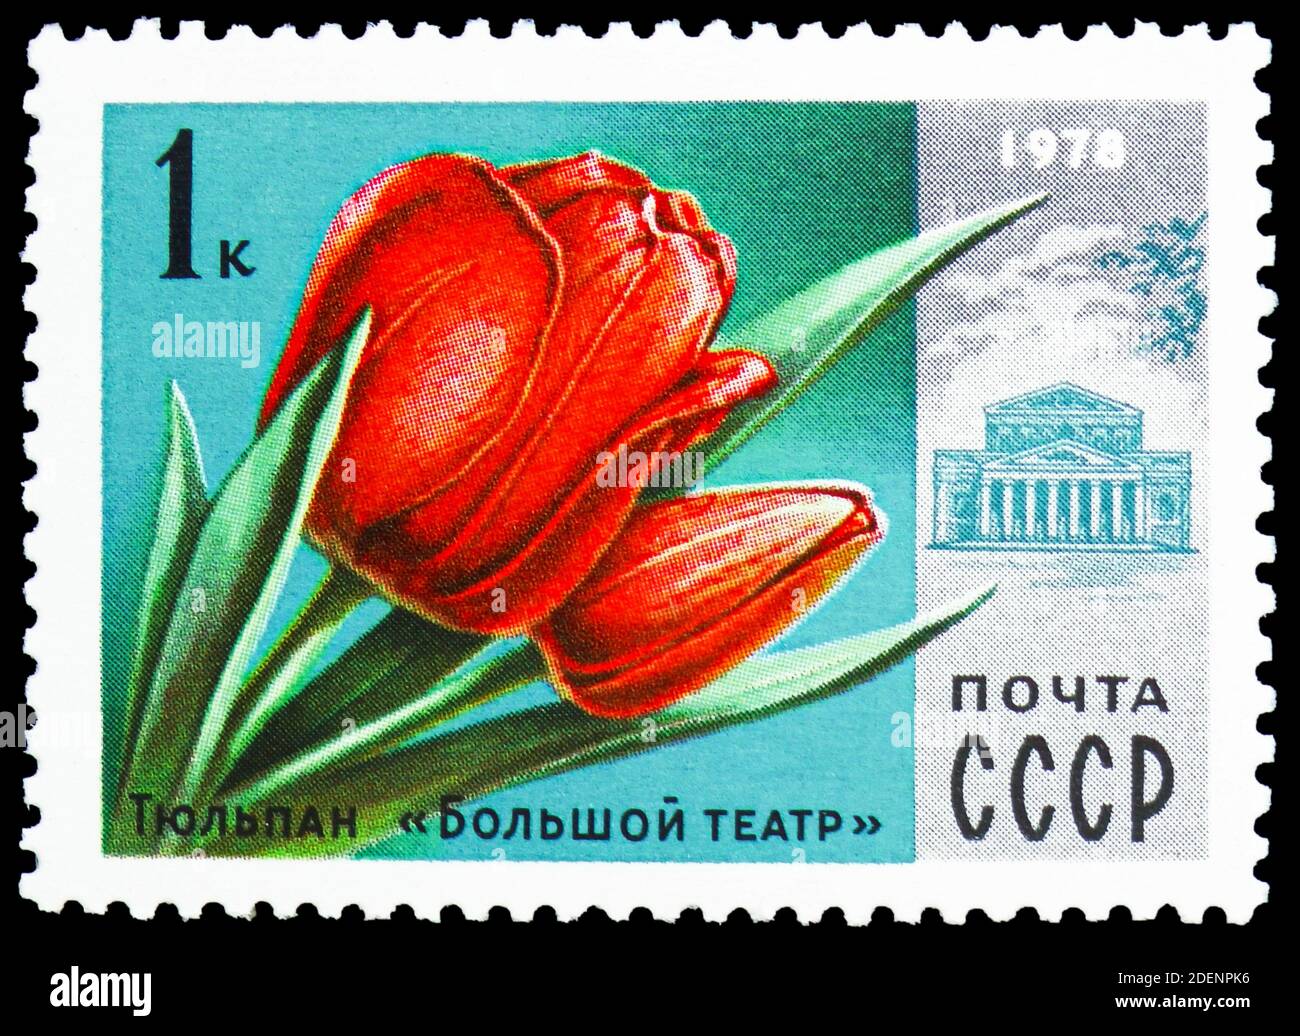 MOSCOW, RUSSIA - JUNE 28, 2020: Postage stamp printed in Soviet Union shows Tulip "Bolshoi Theatre", Moscow Flowers serie, circa 1978 Stock Photo